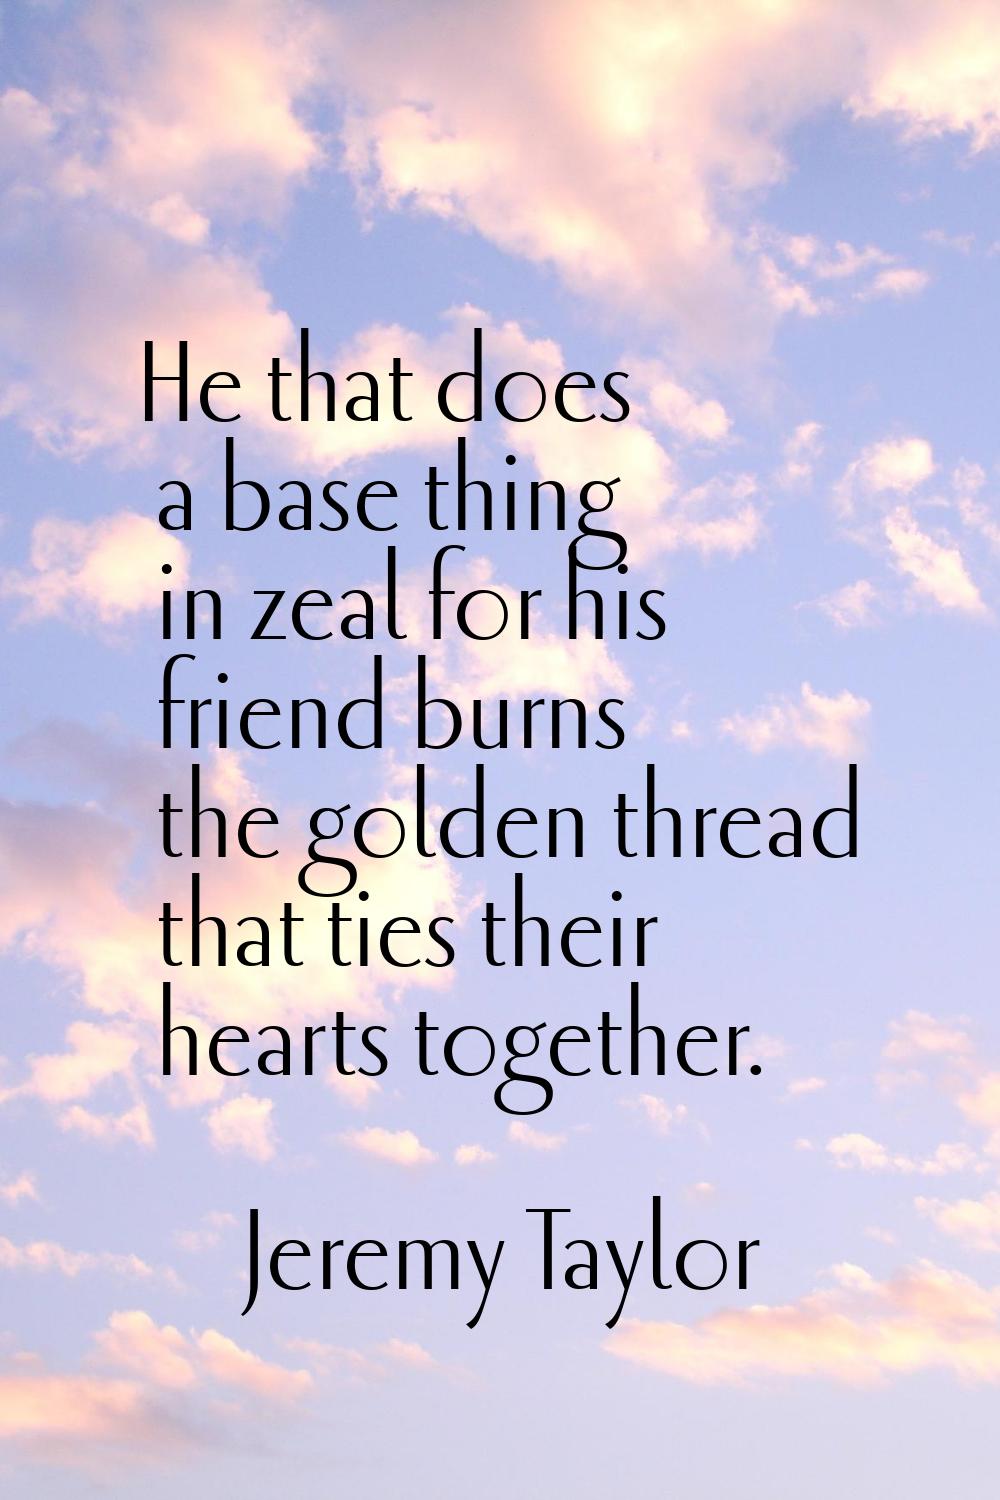 He that does a base thing in zeal for his friend burns the golden thread that ties their hearts tog